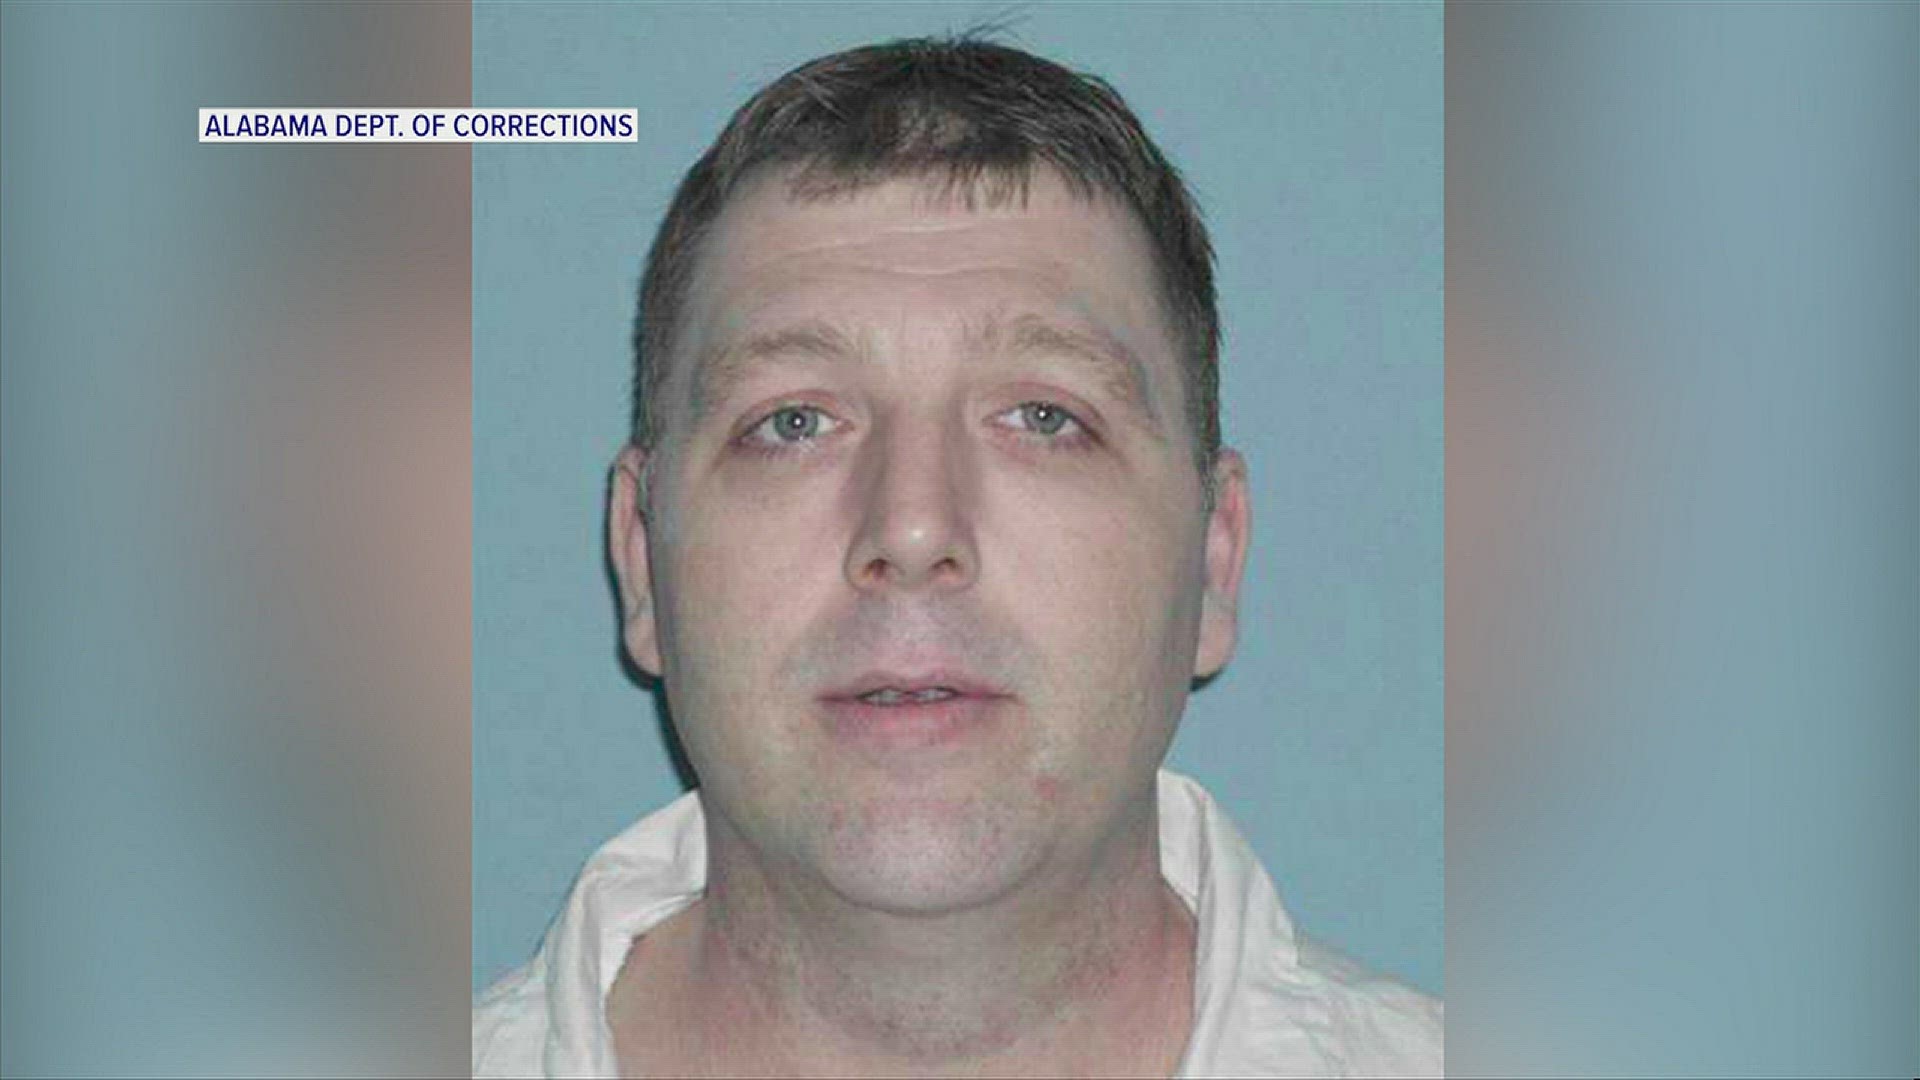 The 50-year-old Jamie Mills is convicted of killing Floyd and Vera Hill during a 2004 robbery in Marion County.